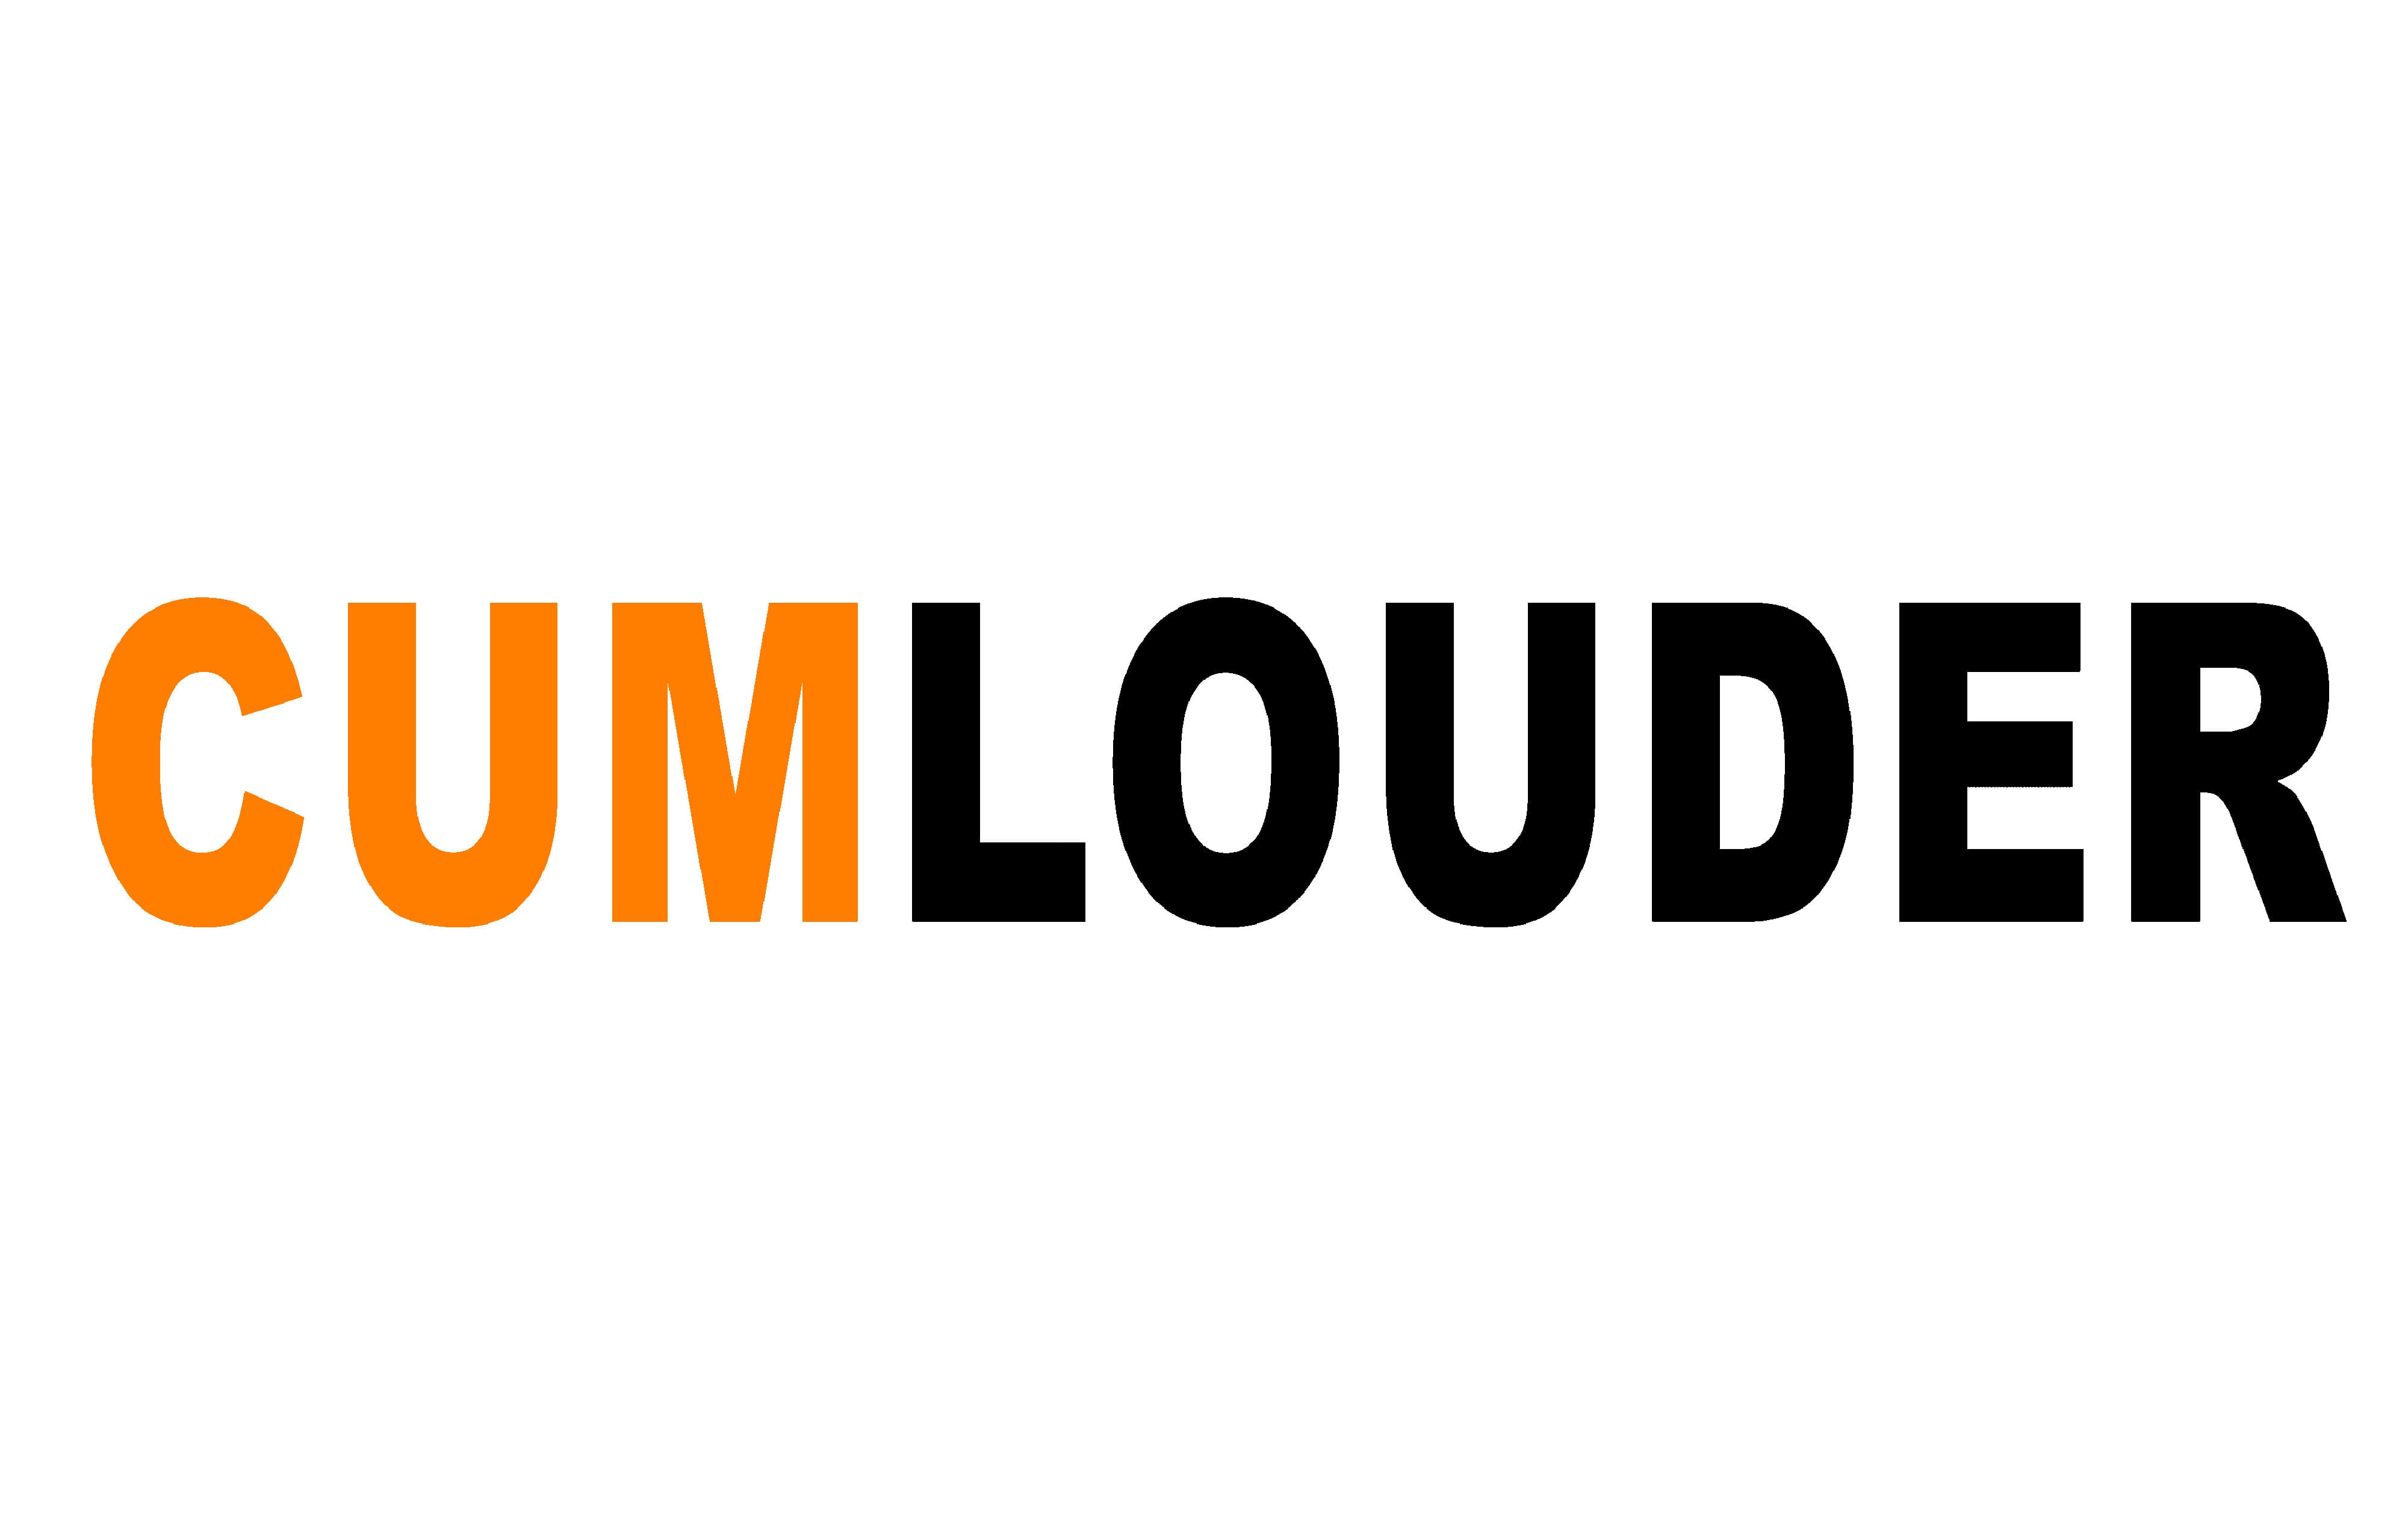 Cum Louder - CumLouder Logo and symbol, meaning, history, PNG, new